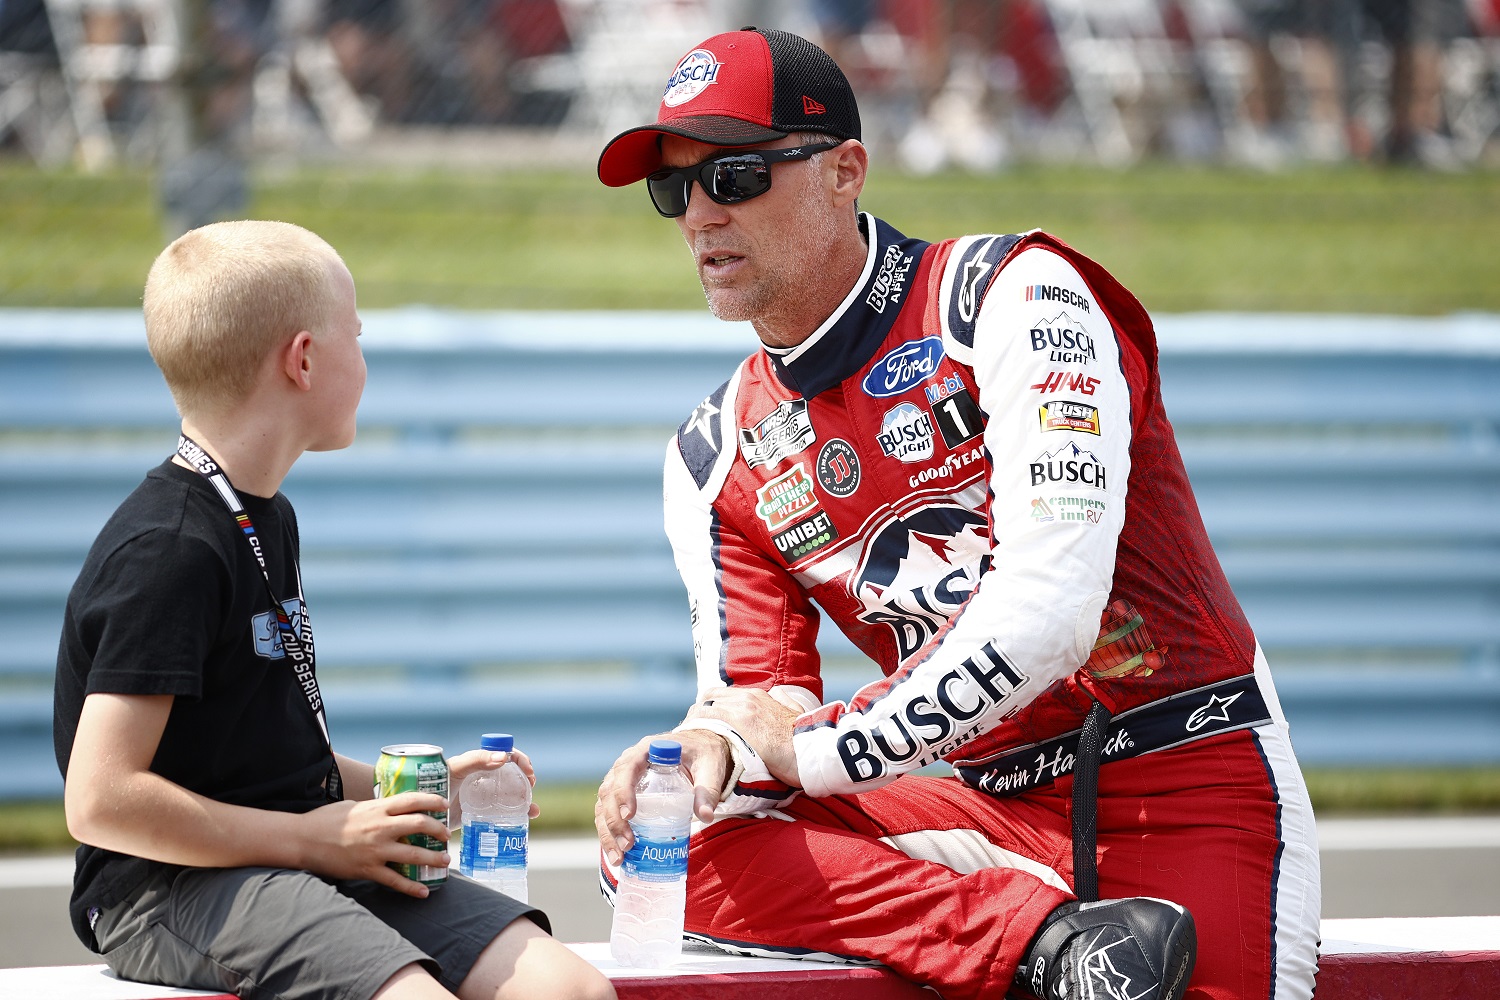 Kevin Harvick, driver of the No. 4 Ford, speaks with his son, Keelan, on the grid prior to the NASCAR Cup Series Go Bowling at The Glen at Watkins Glen International on Aug. 8, 2021.